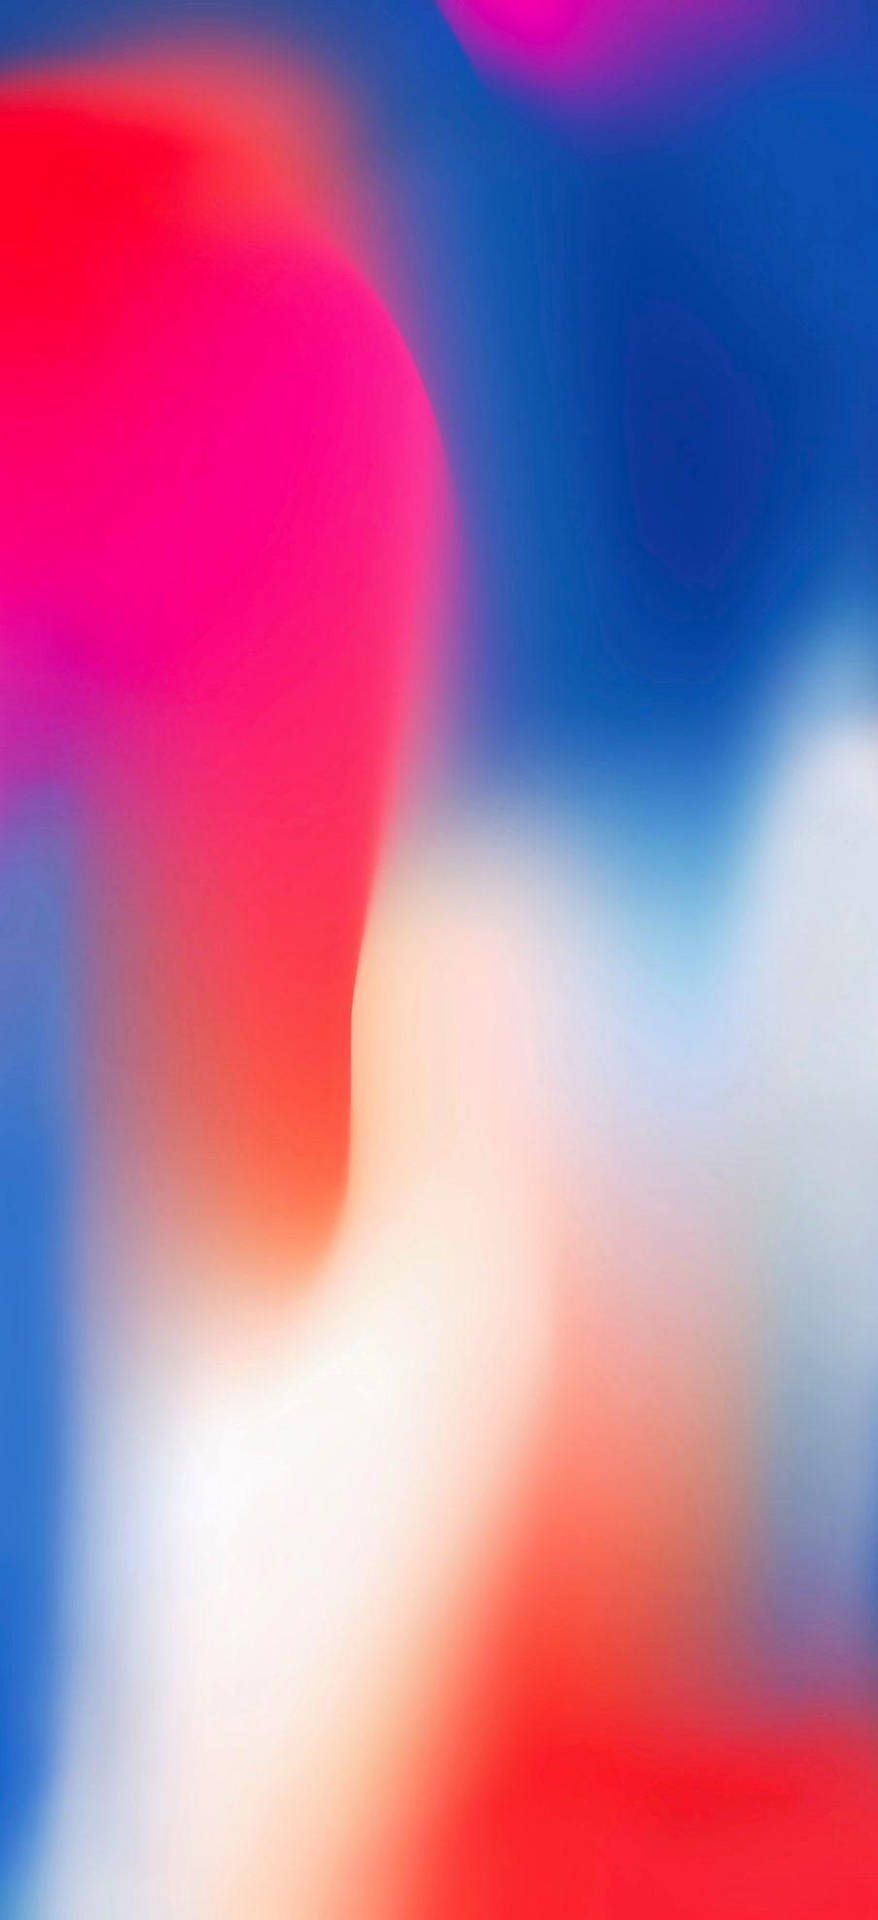 [100+] Iphone Live Wallpapers | Wallpapers.com